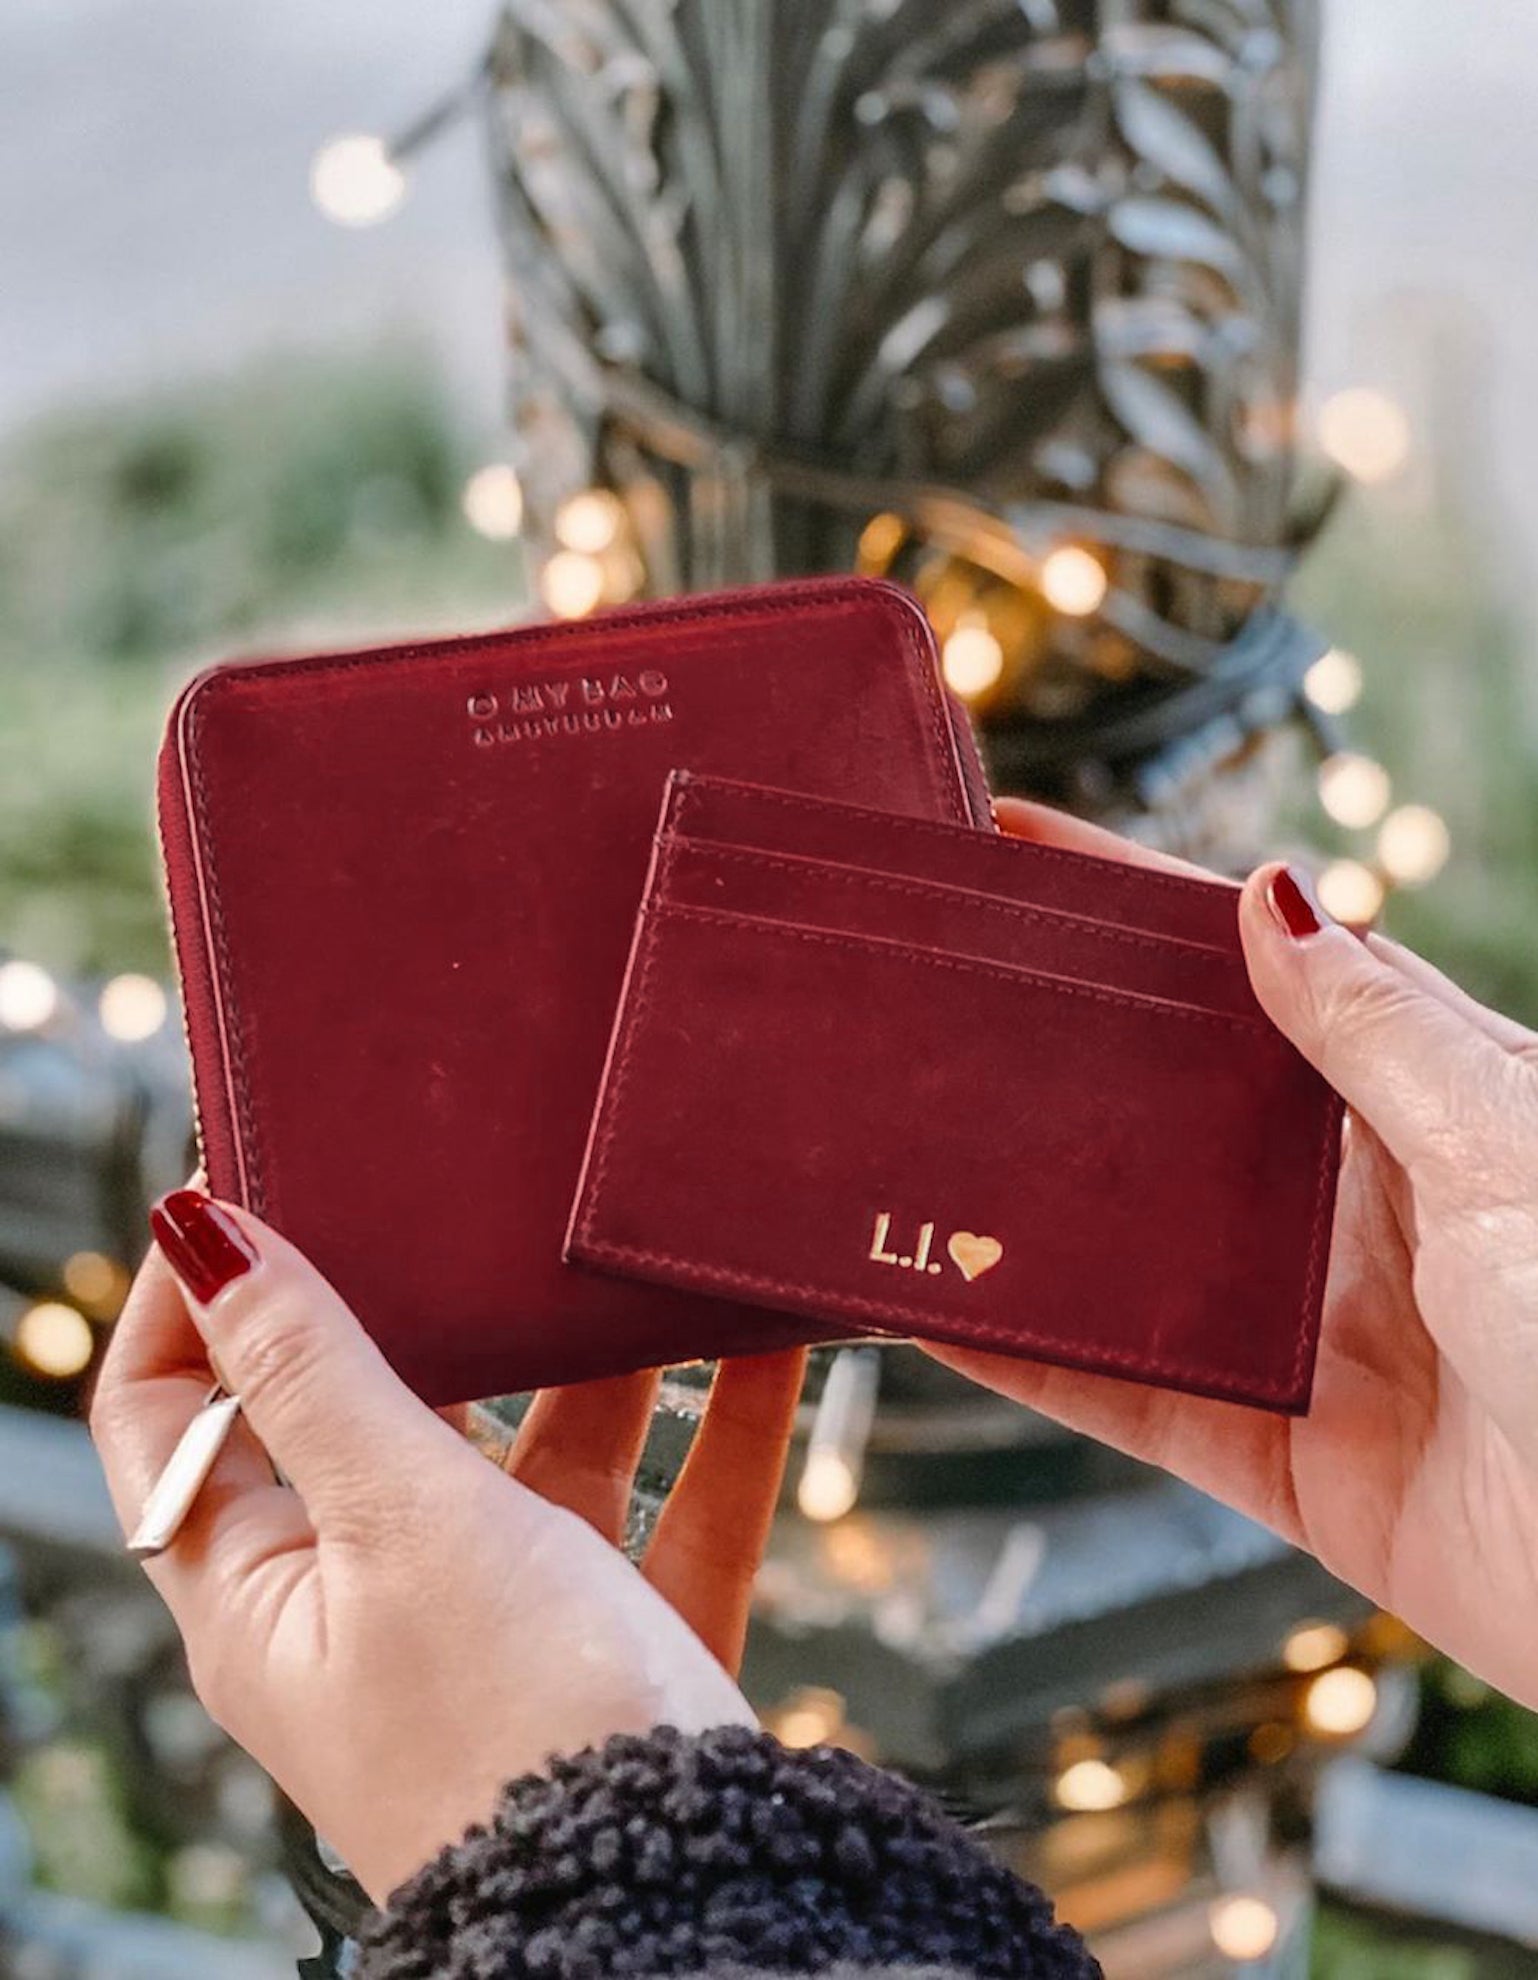 Marks Cardcase Ruby Classic Leather. Square leather wallet, card case for bank cards. Monogram Image.